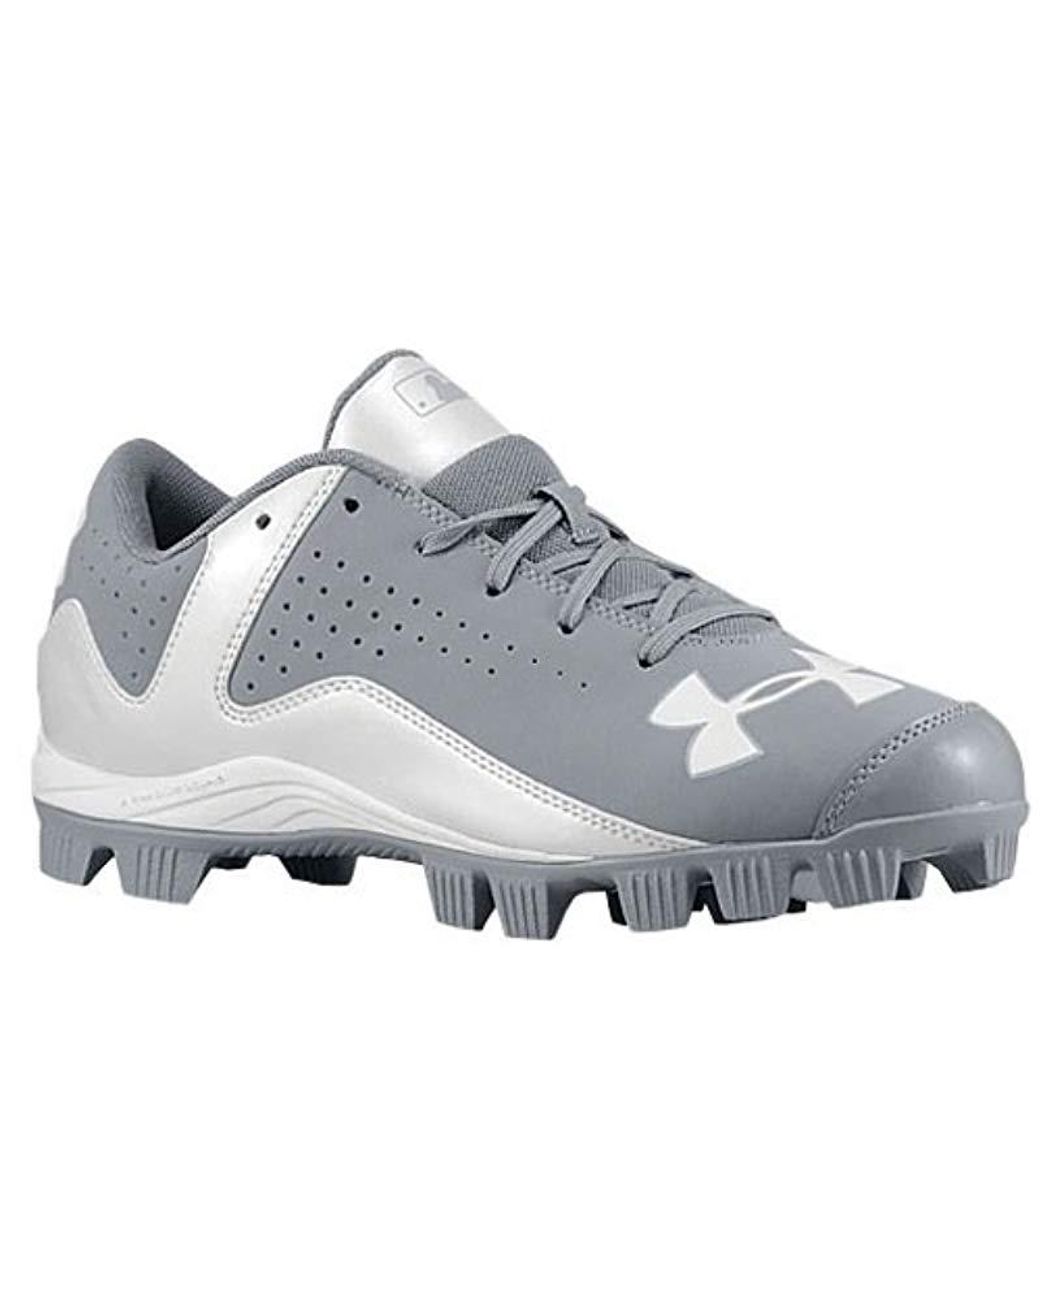 Anthracite //Black 7.5 Under Armour Womens Micro G Pursuit Baseball Shoe 100